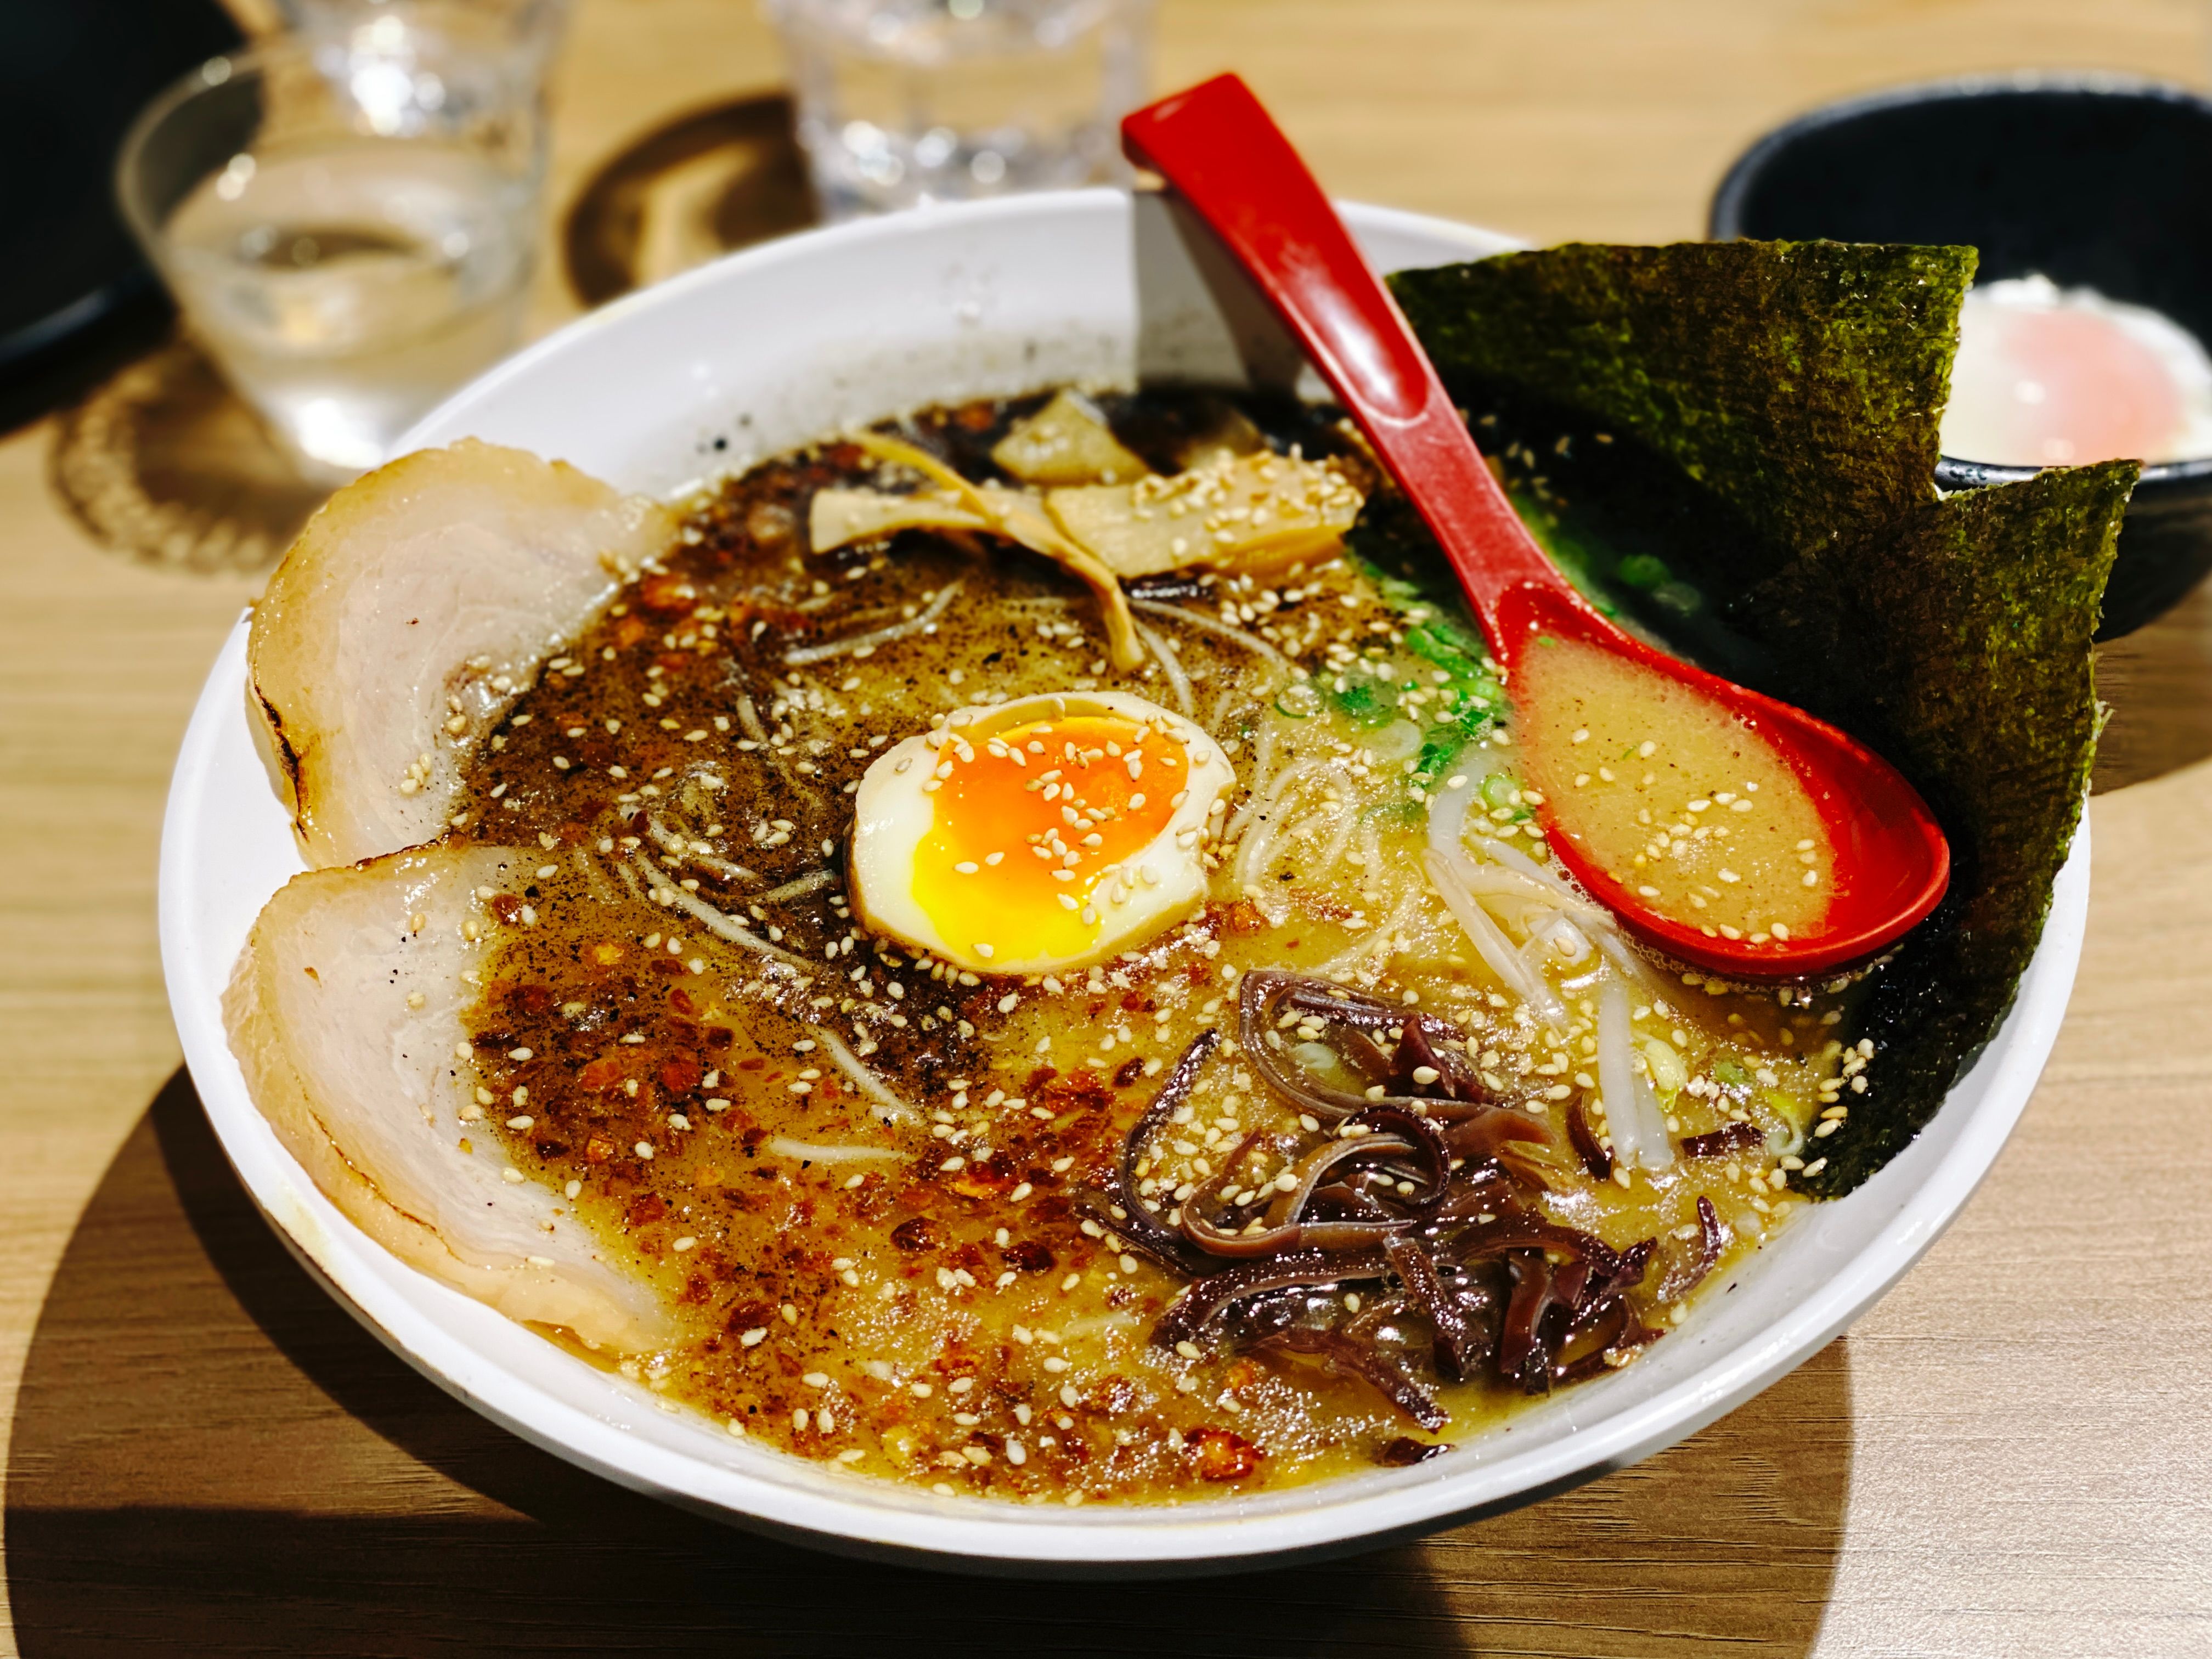 A photo of a big bowl of black garlic ramen with a soft-boiled egg on top.